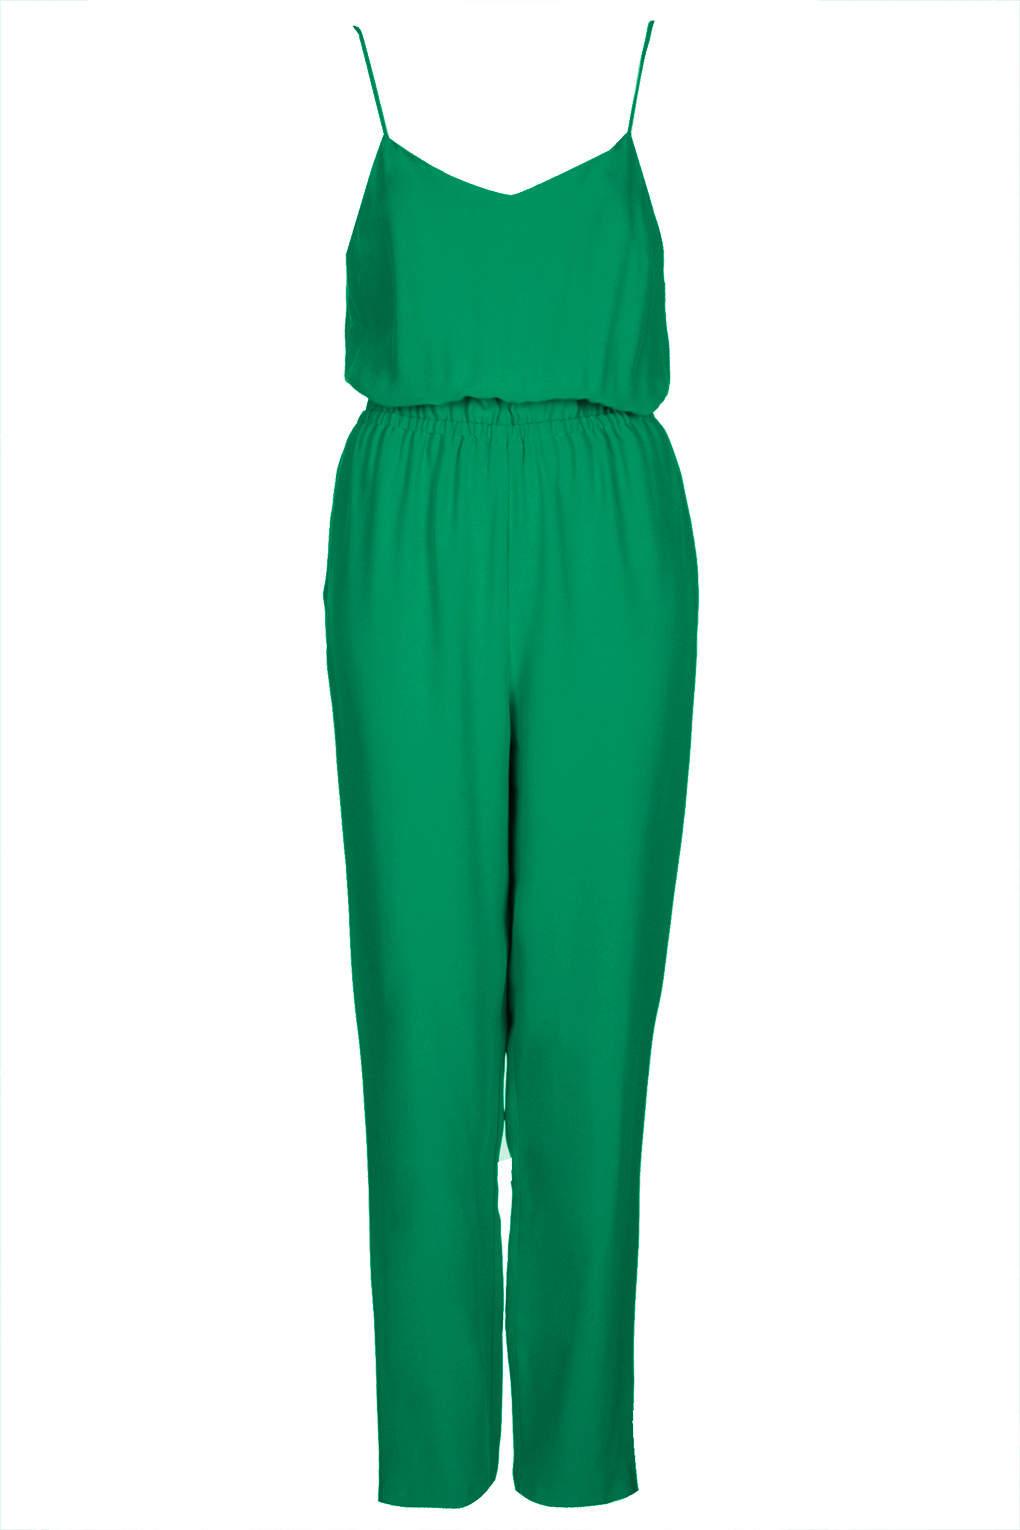 Topshop Lux Strappy Jumpsuit in Green (Jewel Green) | Lyst